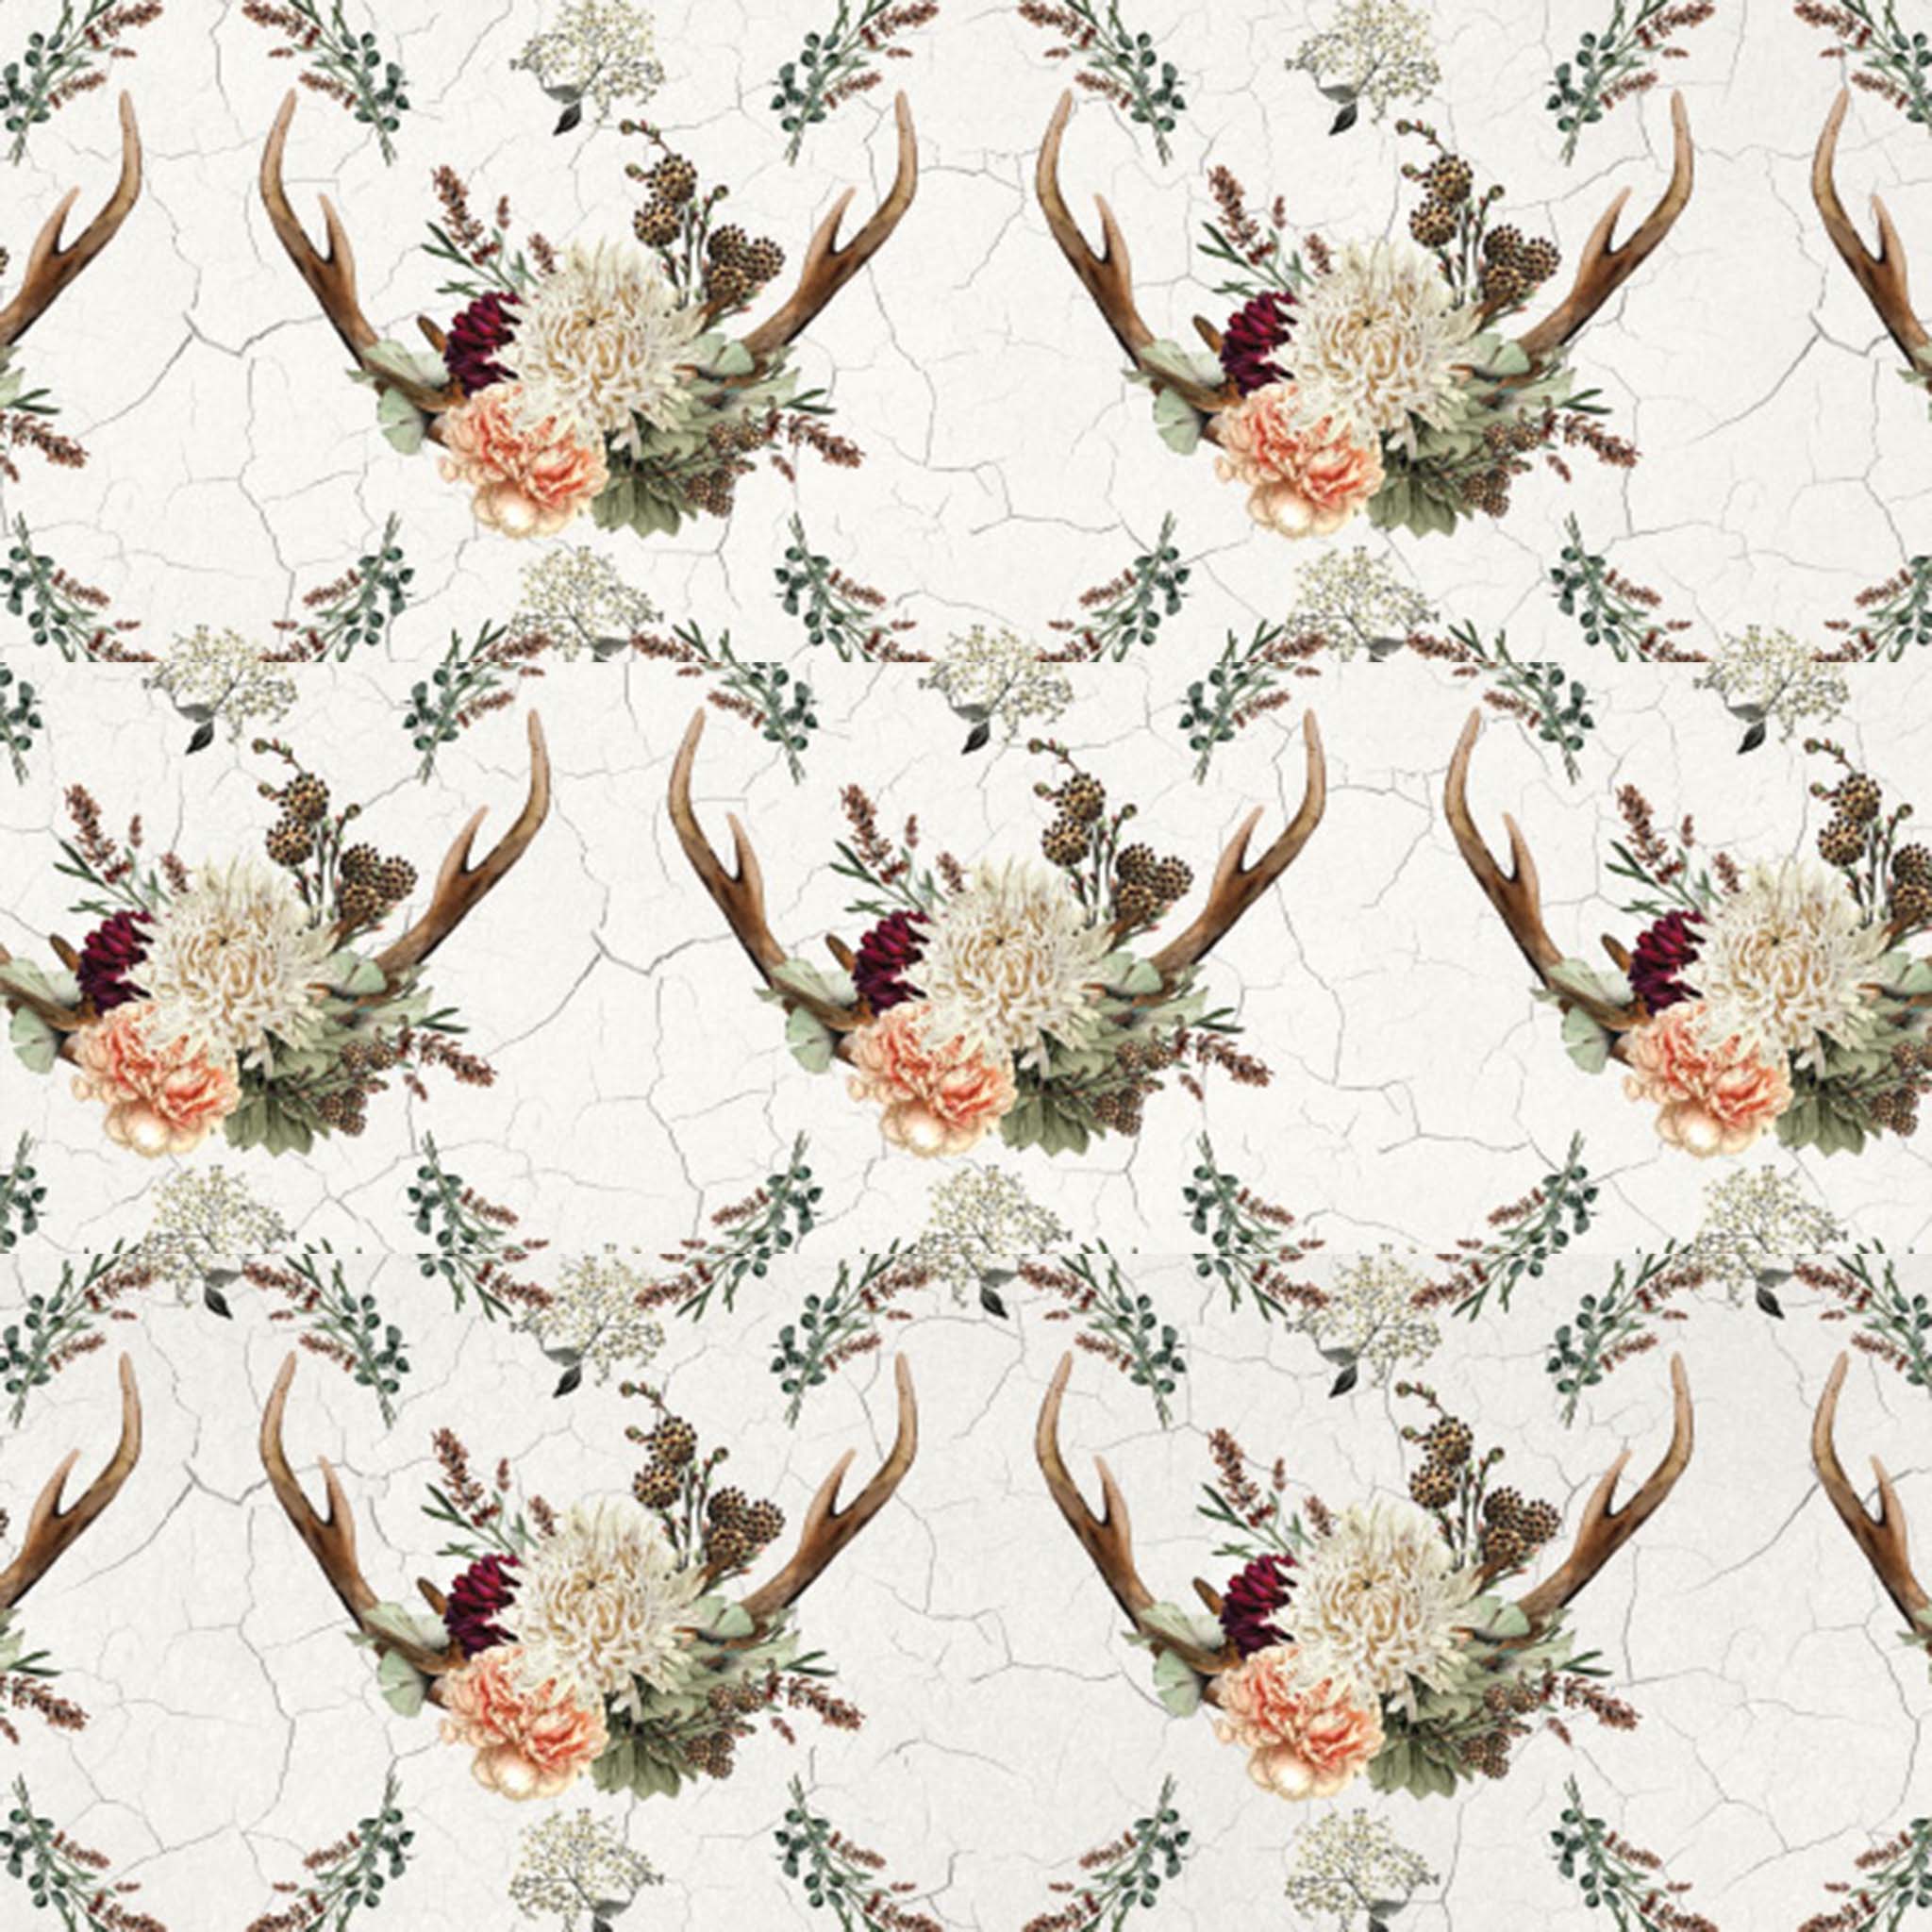 Tissue paper design featuring a trendy boho mix of antlers and flowers on top of a weathered crackle background.